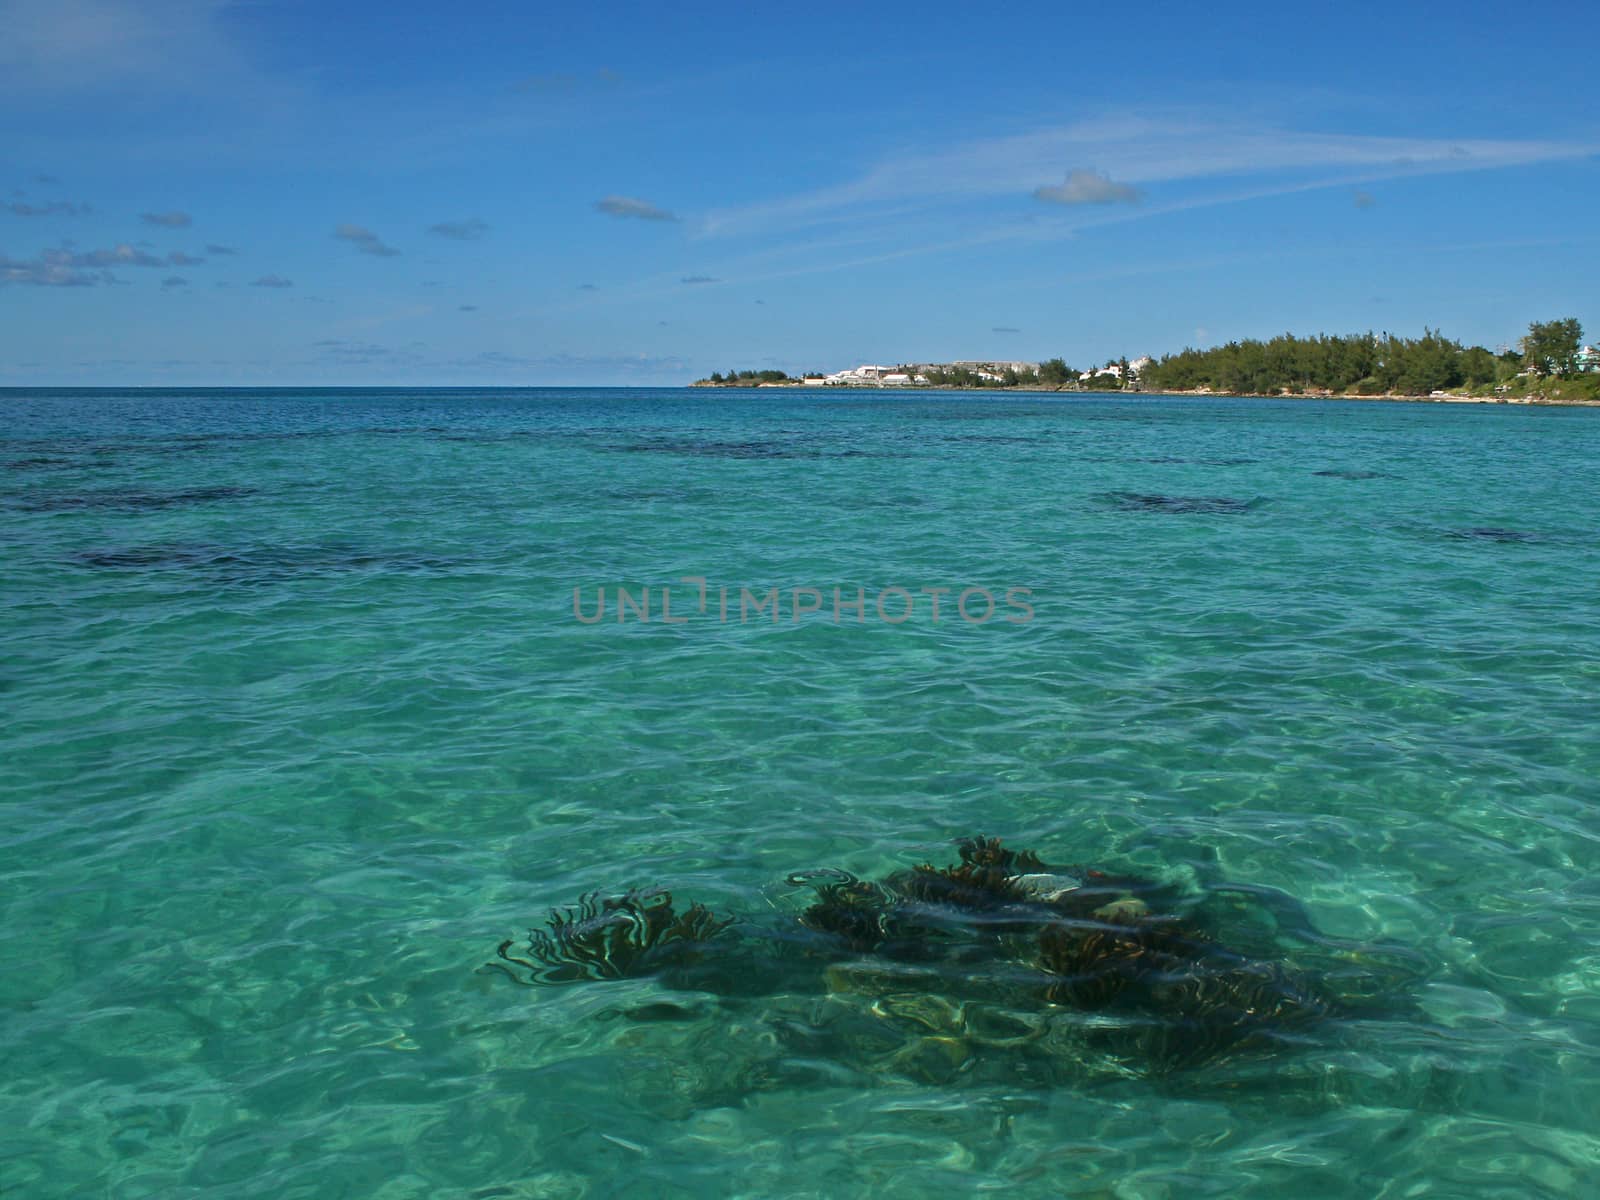 Tropical Sea, with a visible reef by gary_parker